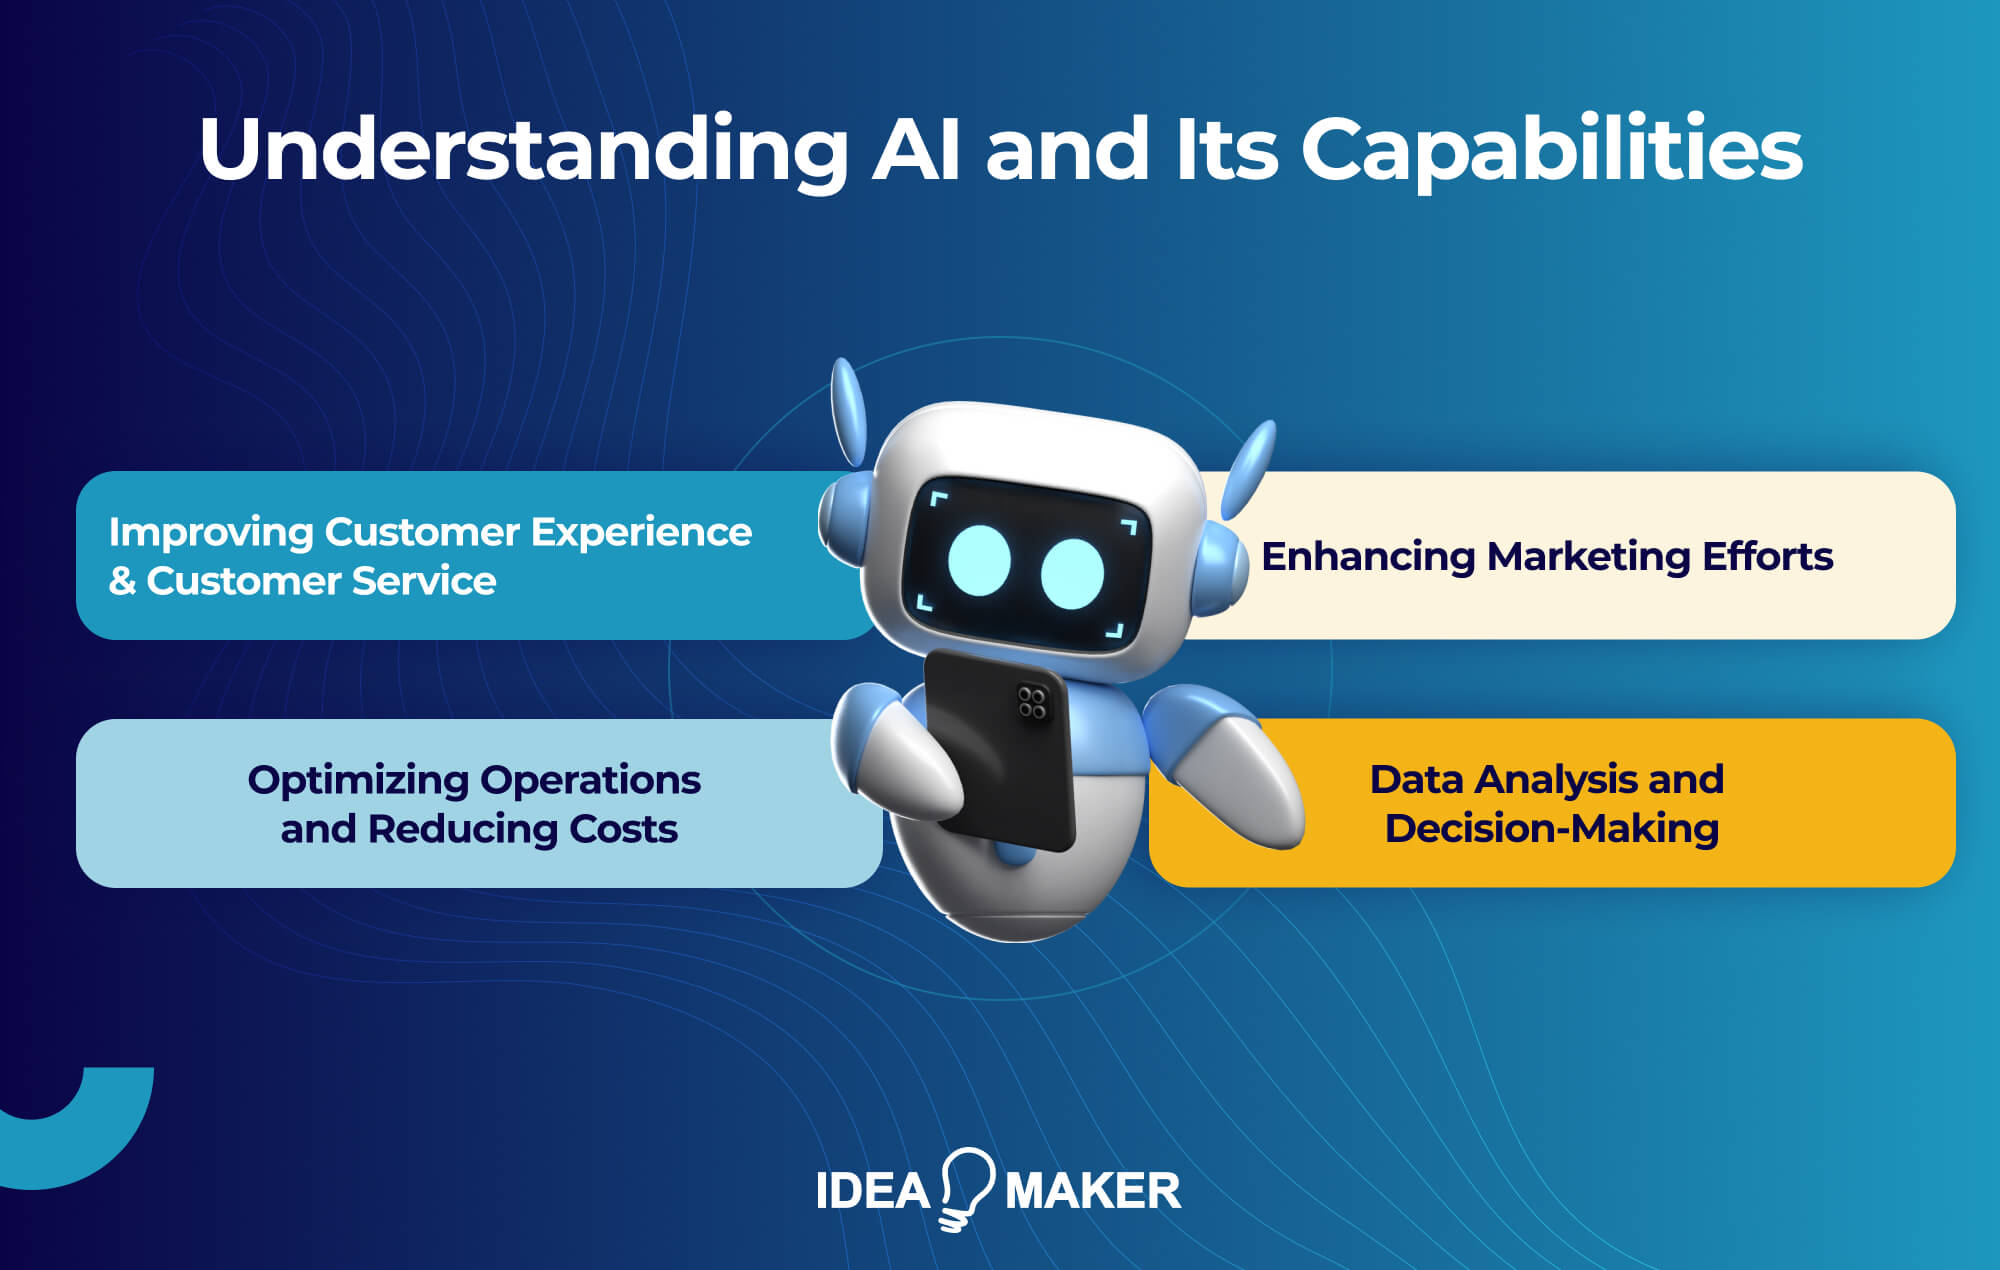 Ideamaker - Understanding AI and Its Capabilities